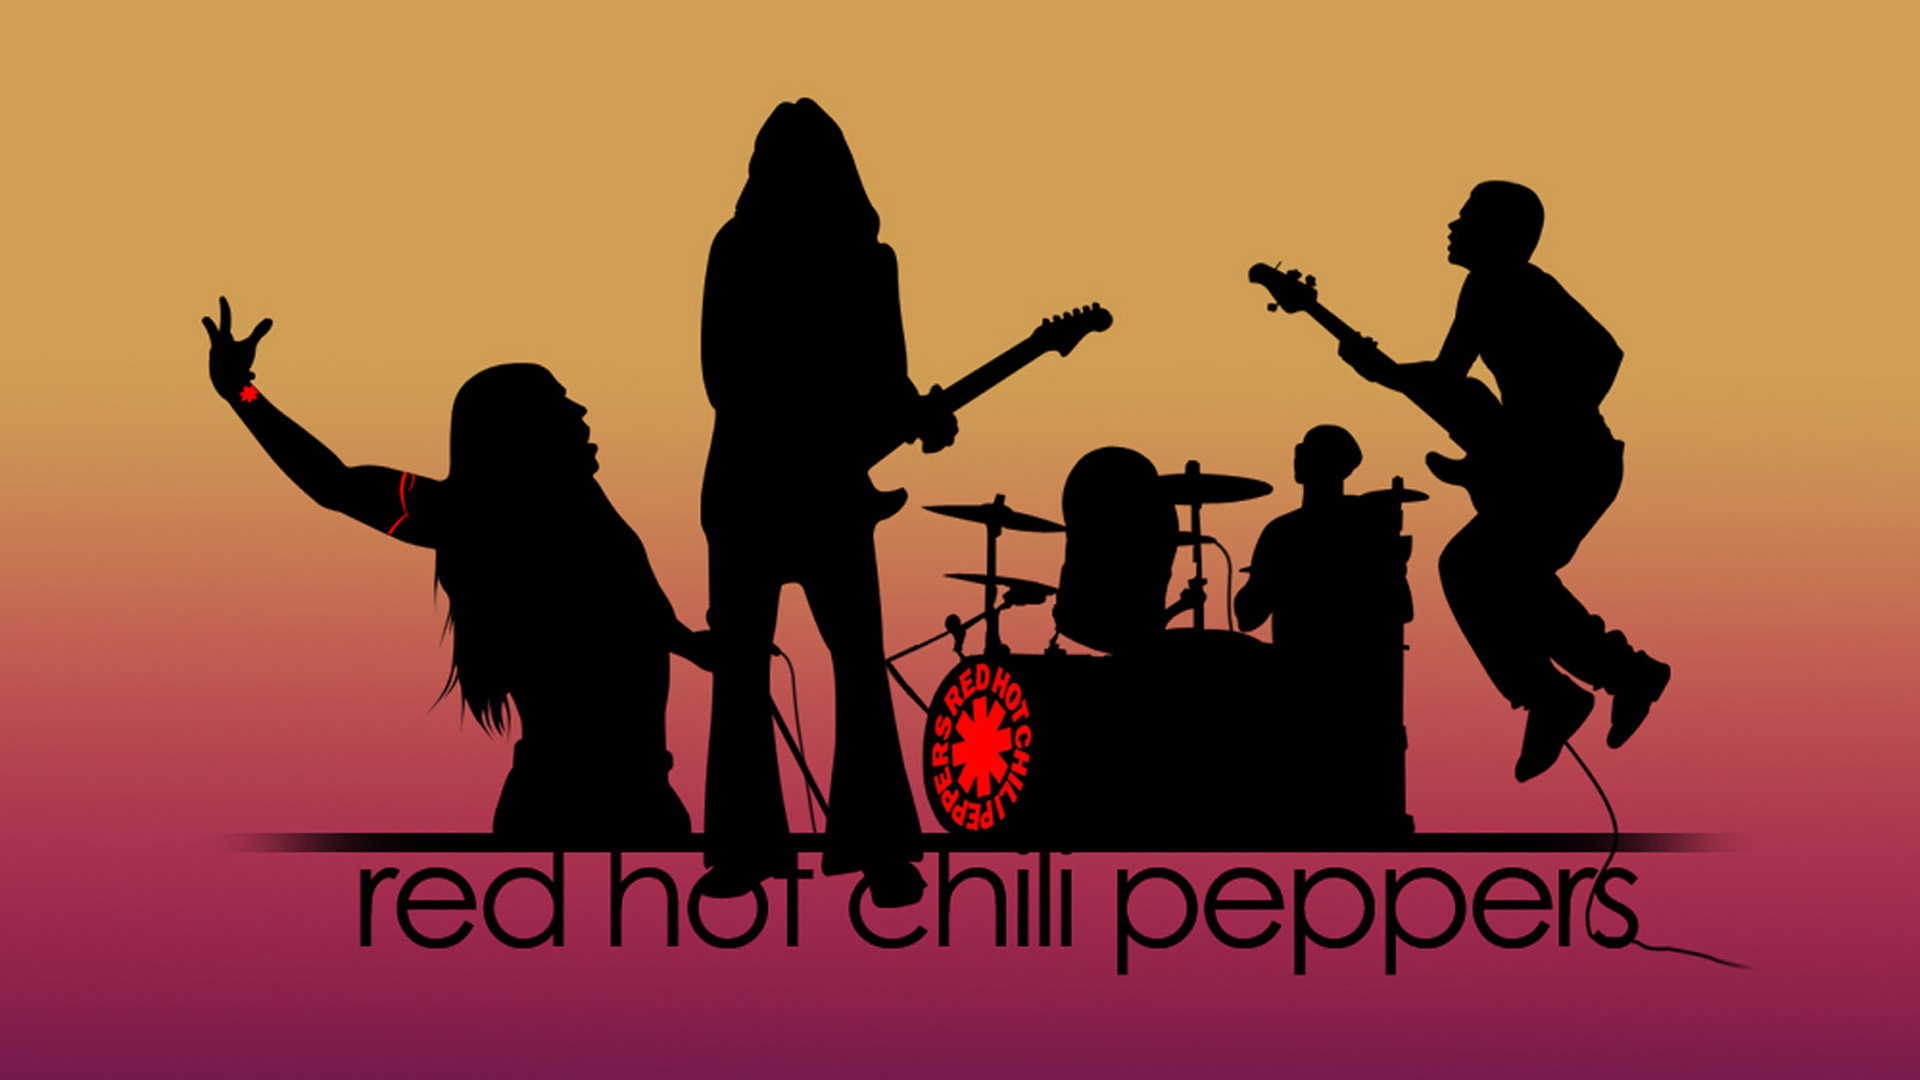 Red hot chili peppers hd wallpapers backgrounds